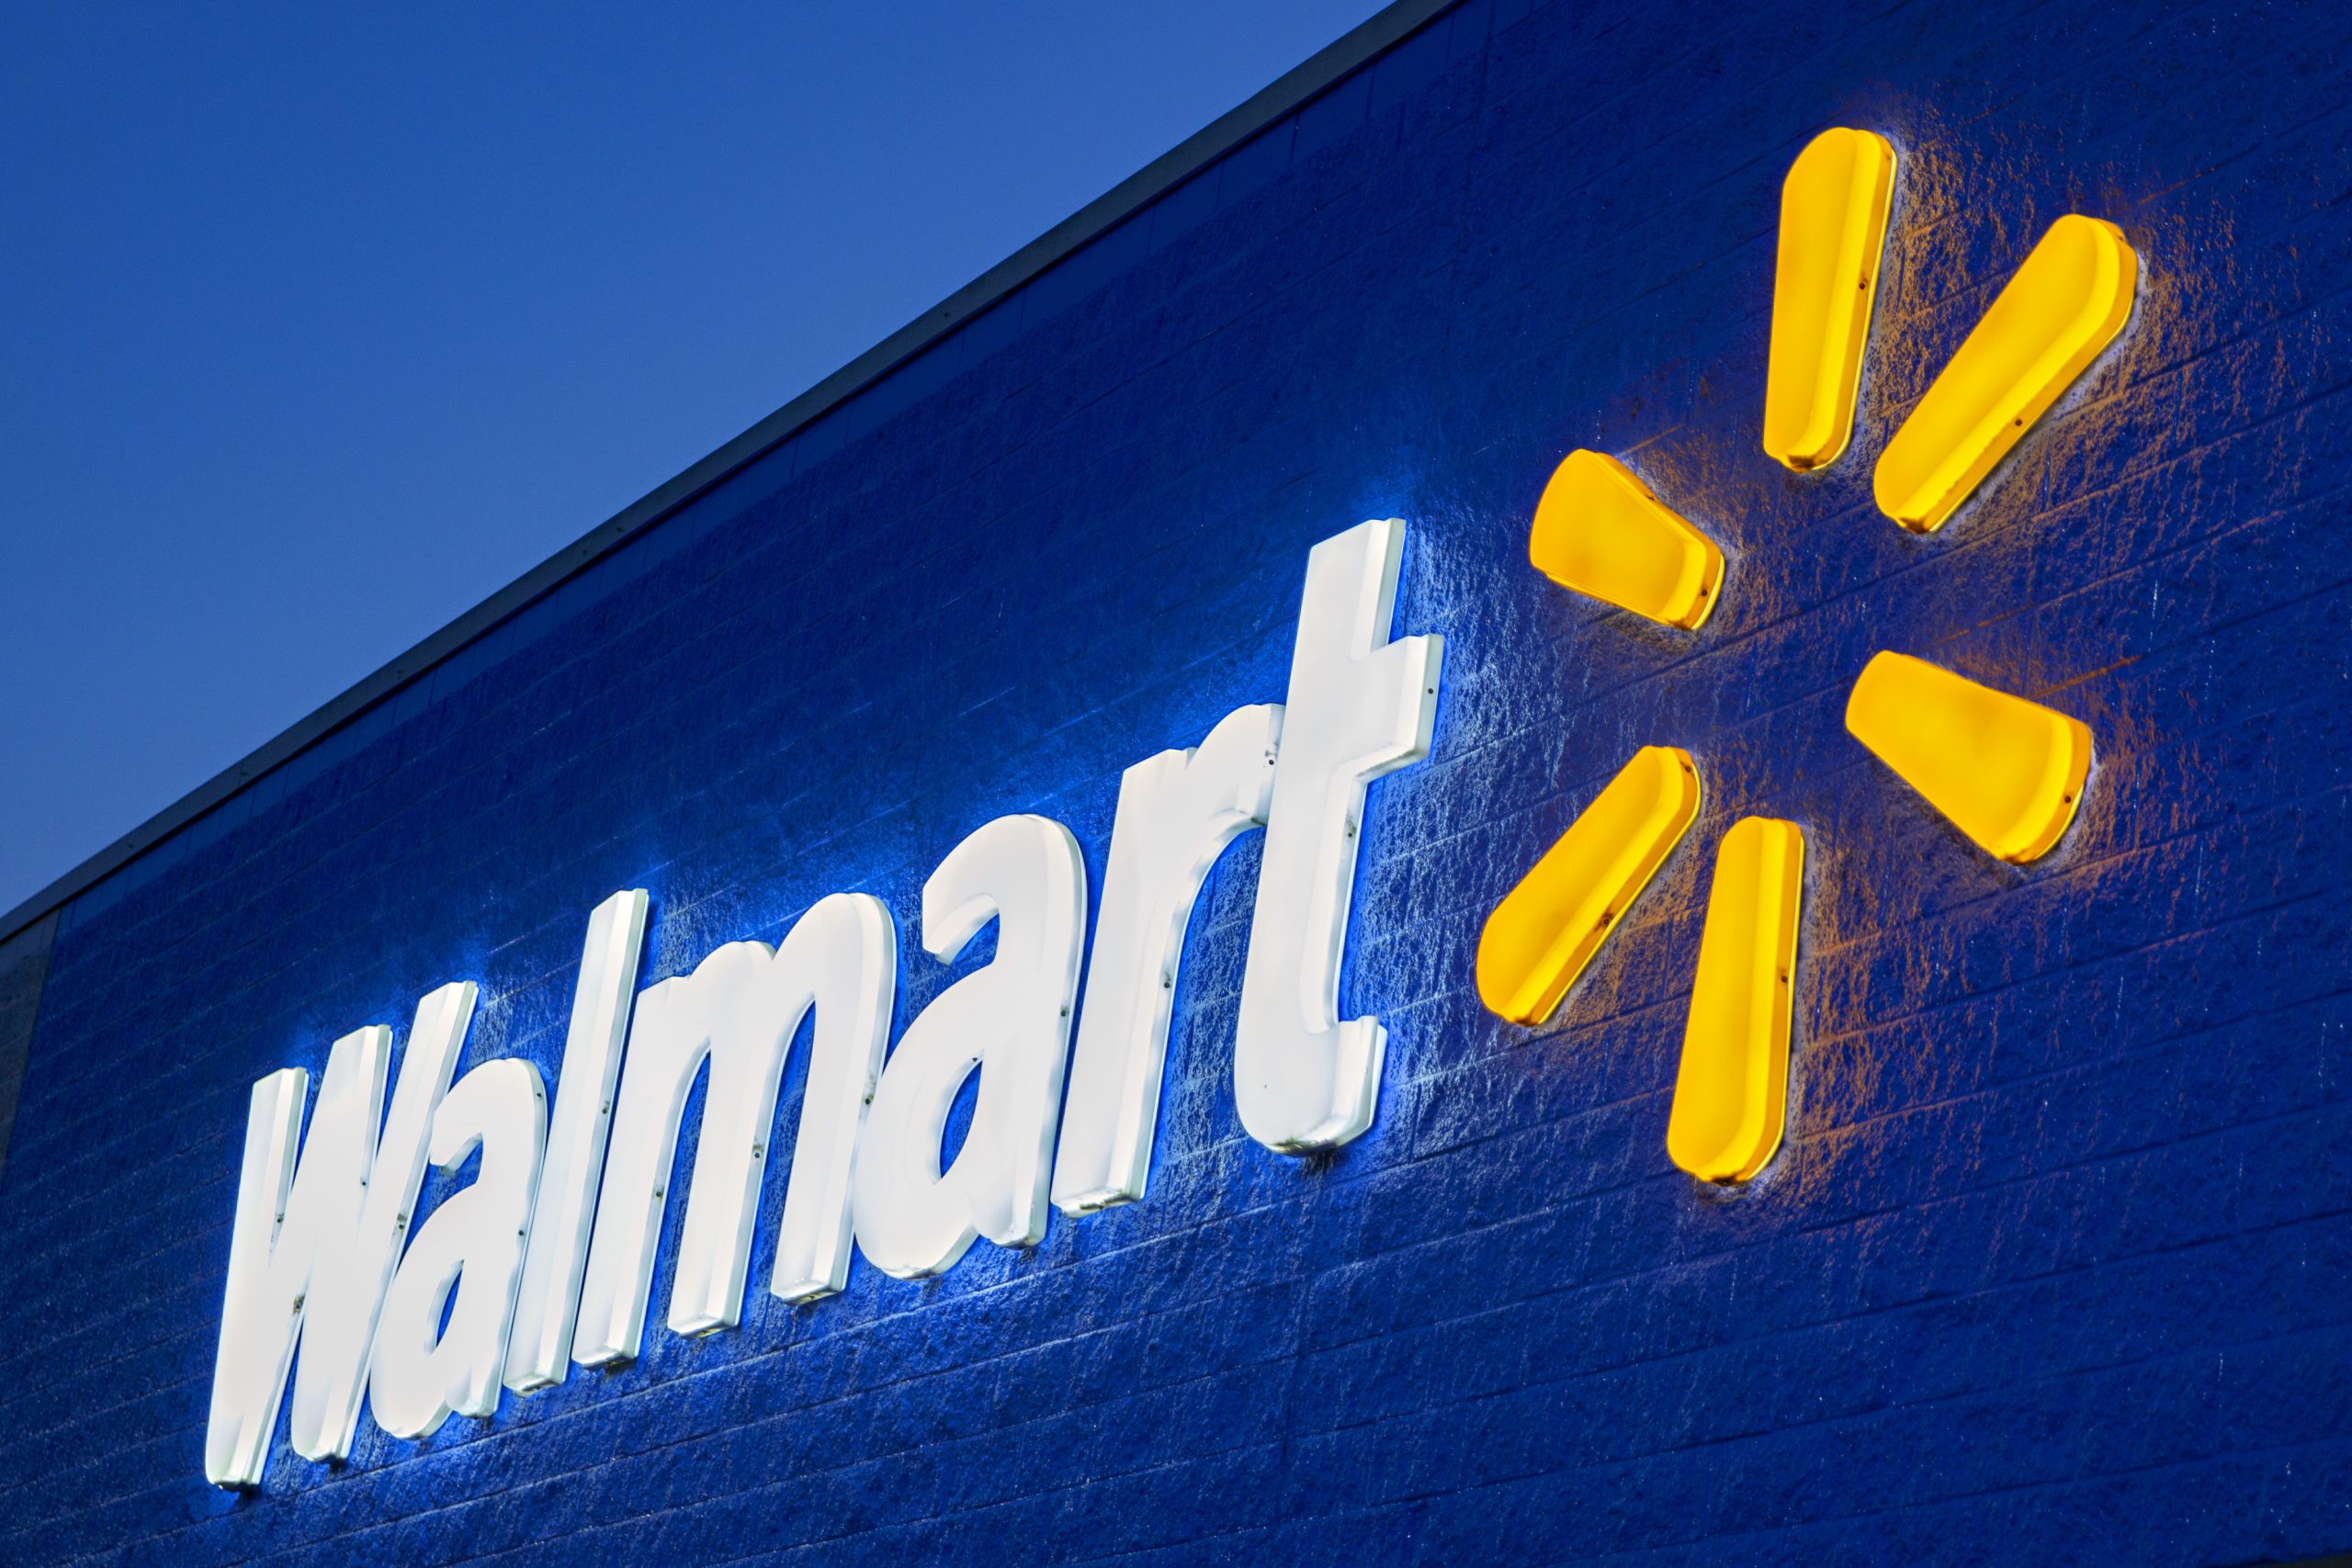 Walmart Takes Aim at Amazon, Facebook, and Google with Online Advertising